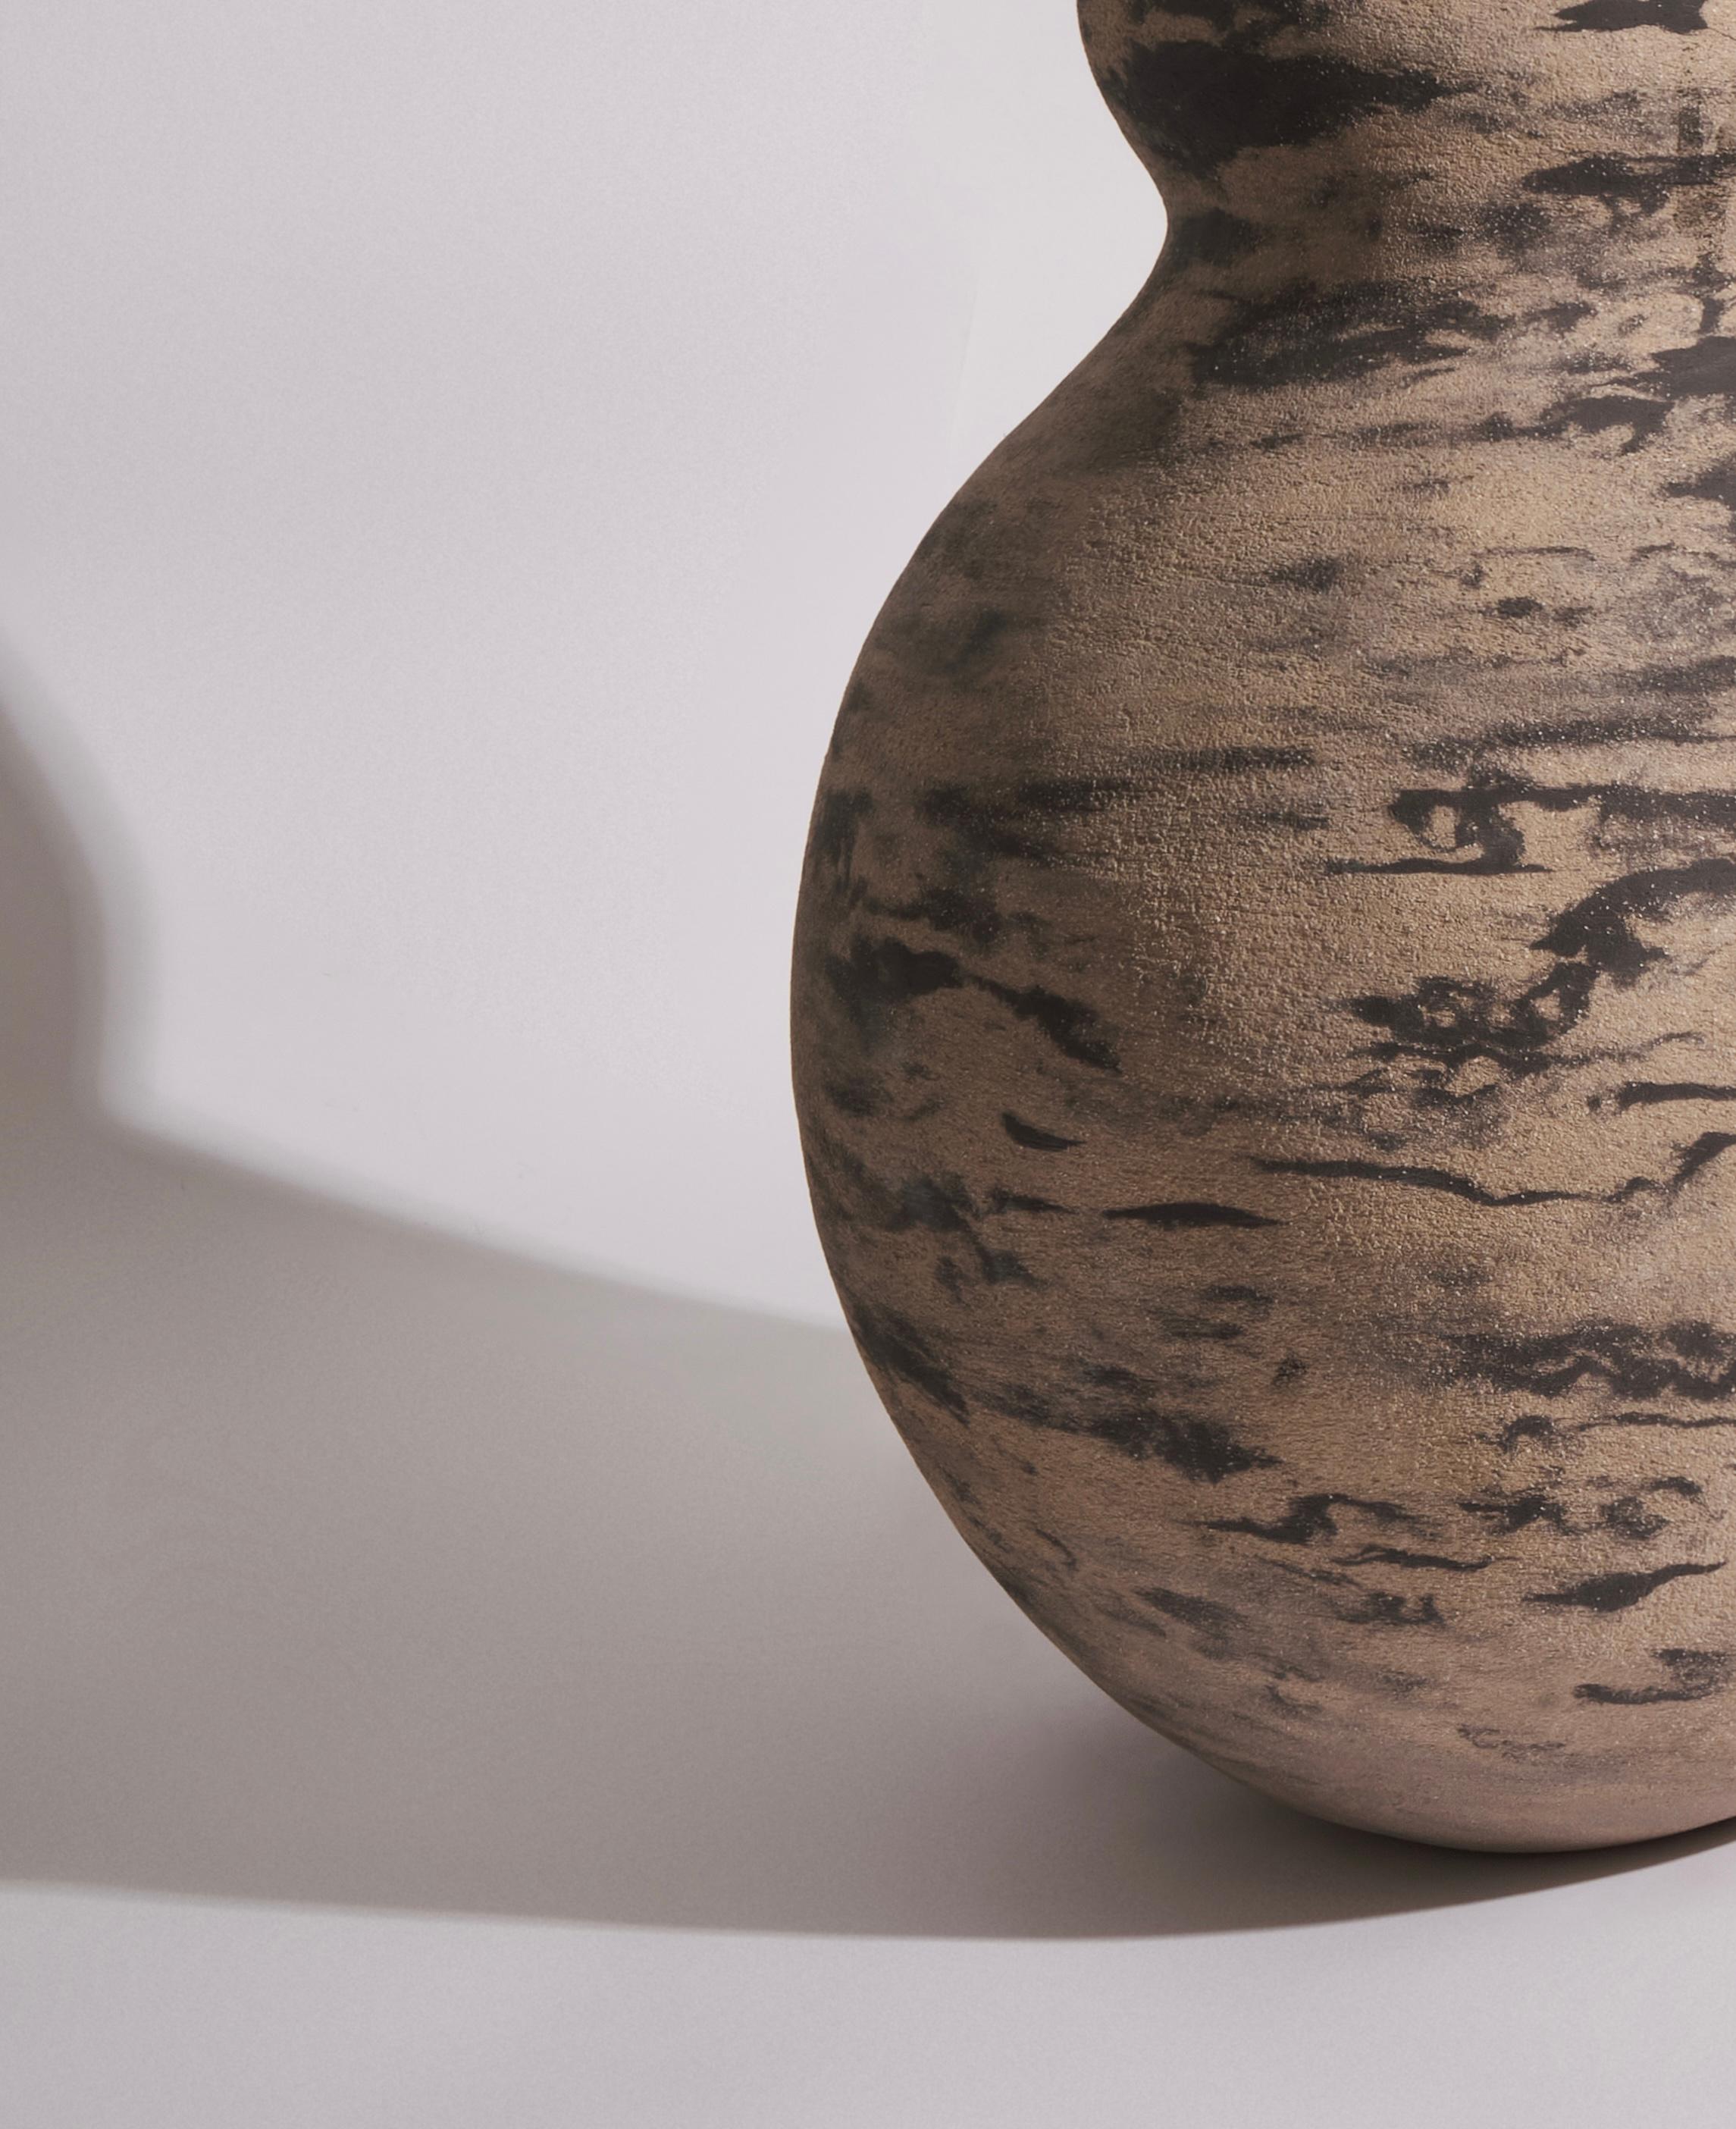 The ceramic body vessel, standing at a 70 cm height, is a creation that elegantly embodies the duality of clay - fragile yet strong, much like the resilience of a woman. The coiling method i employed to craft this piece adds depth and texture to its